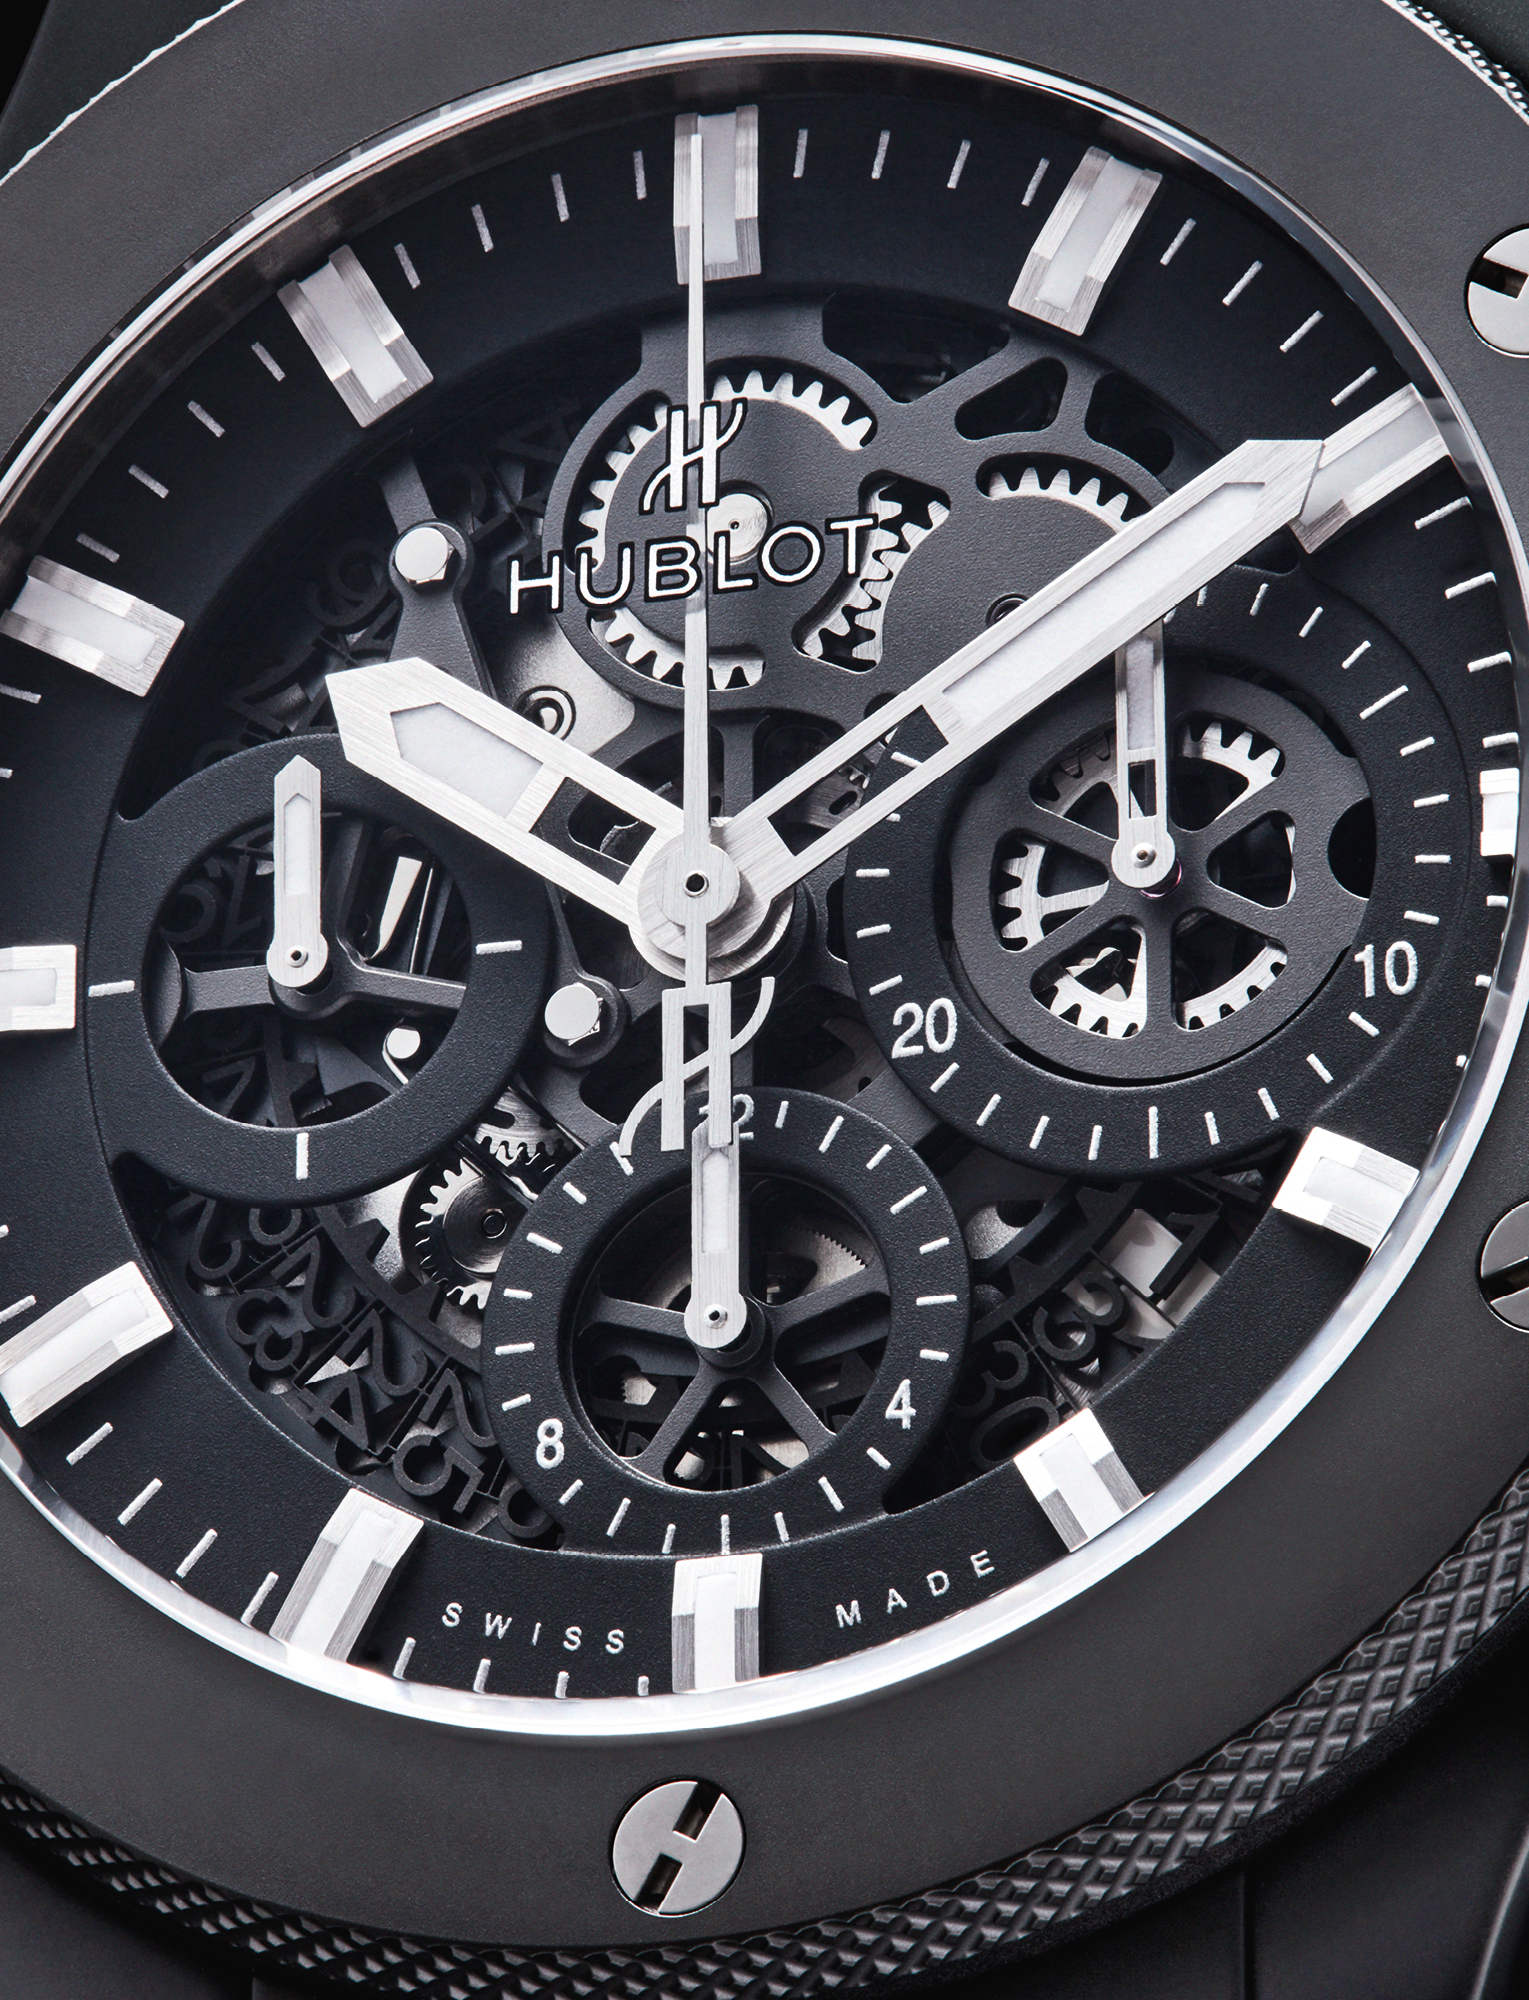 With a matte black skeleton dial, the Hublot Big Bang Aerobang Black Magic features a micro-blasted black ceramic case and bezel, a HUB4214 movement and is available on a black rubber and gummy alligator strap. £16,800, HUBLOT